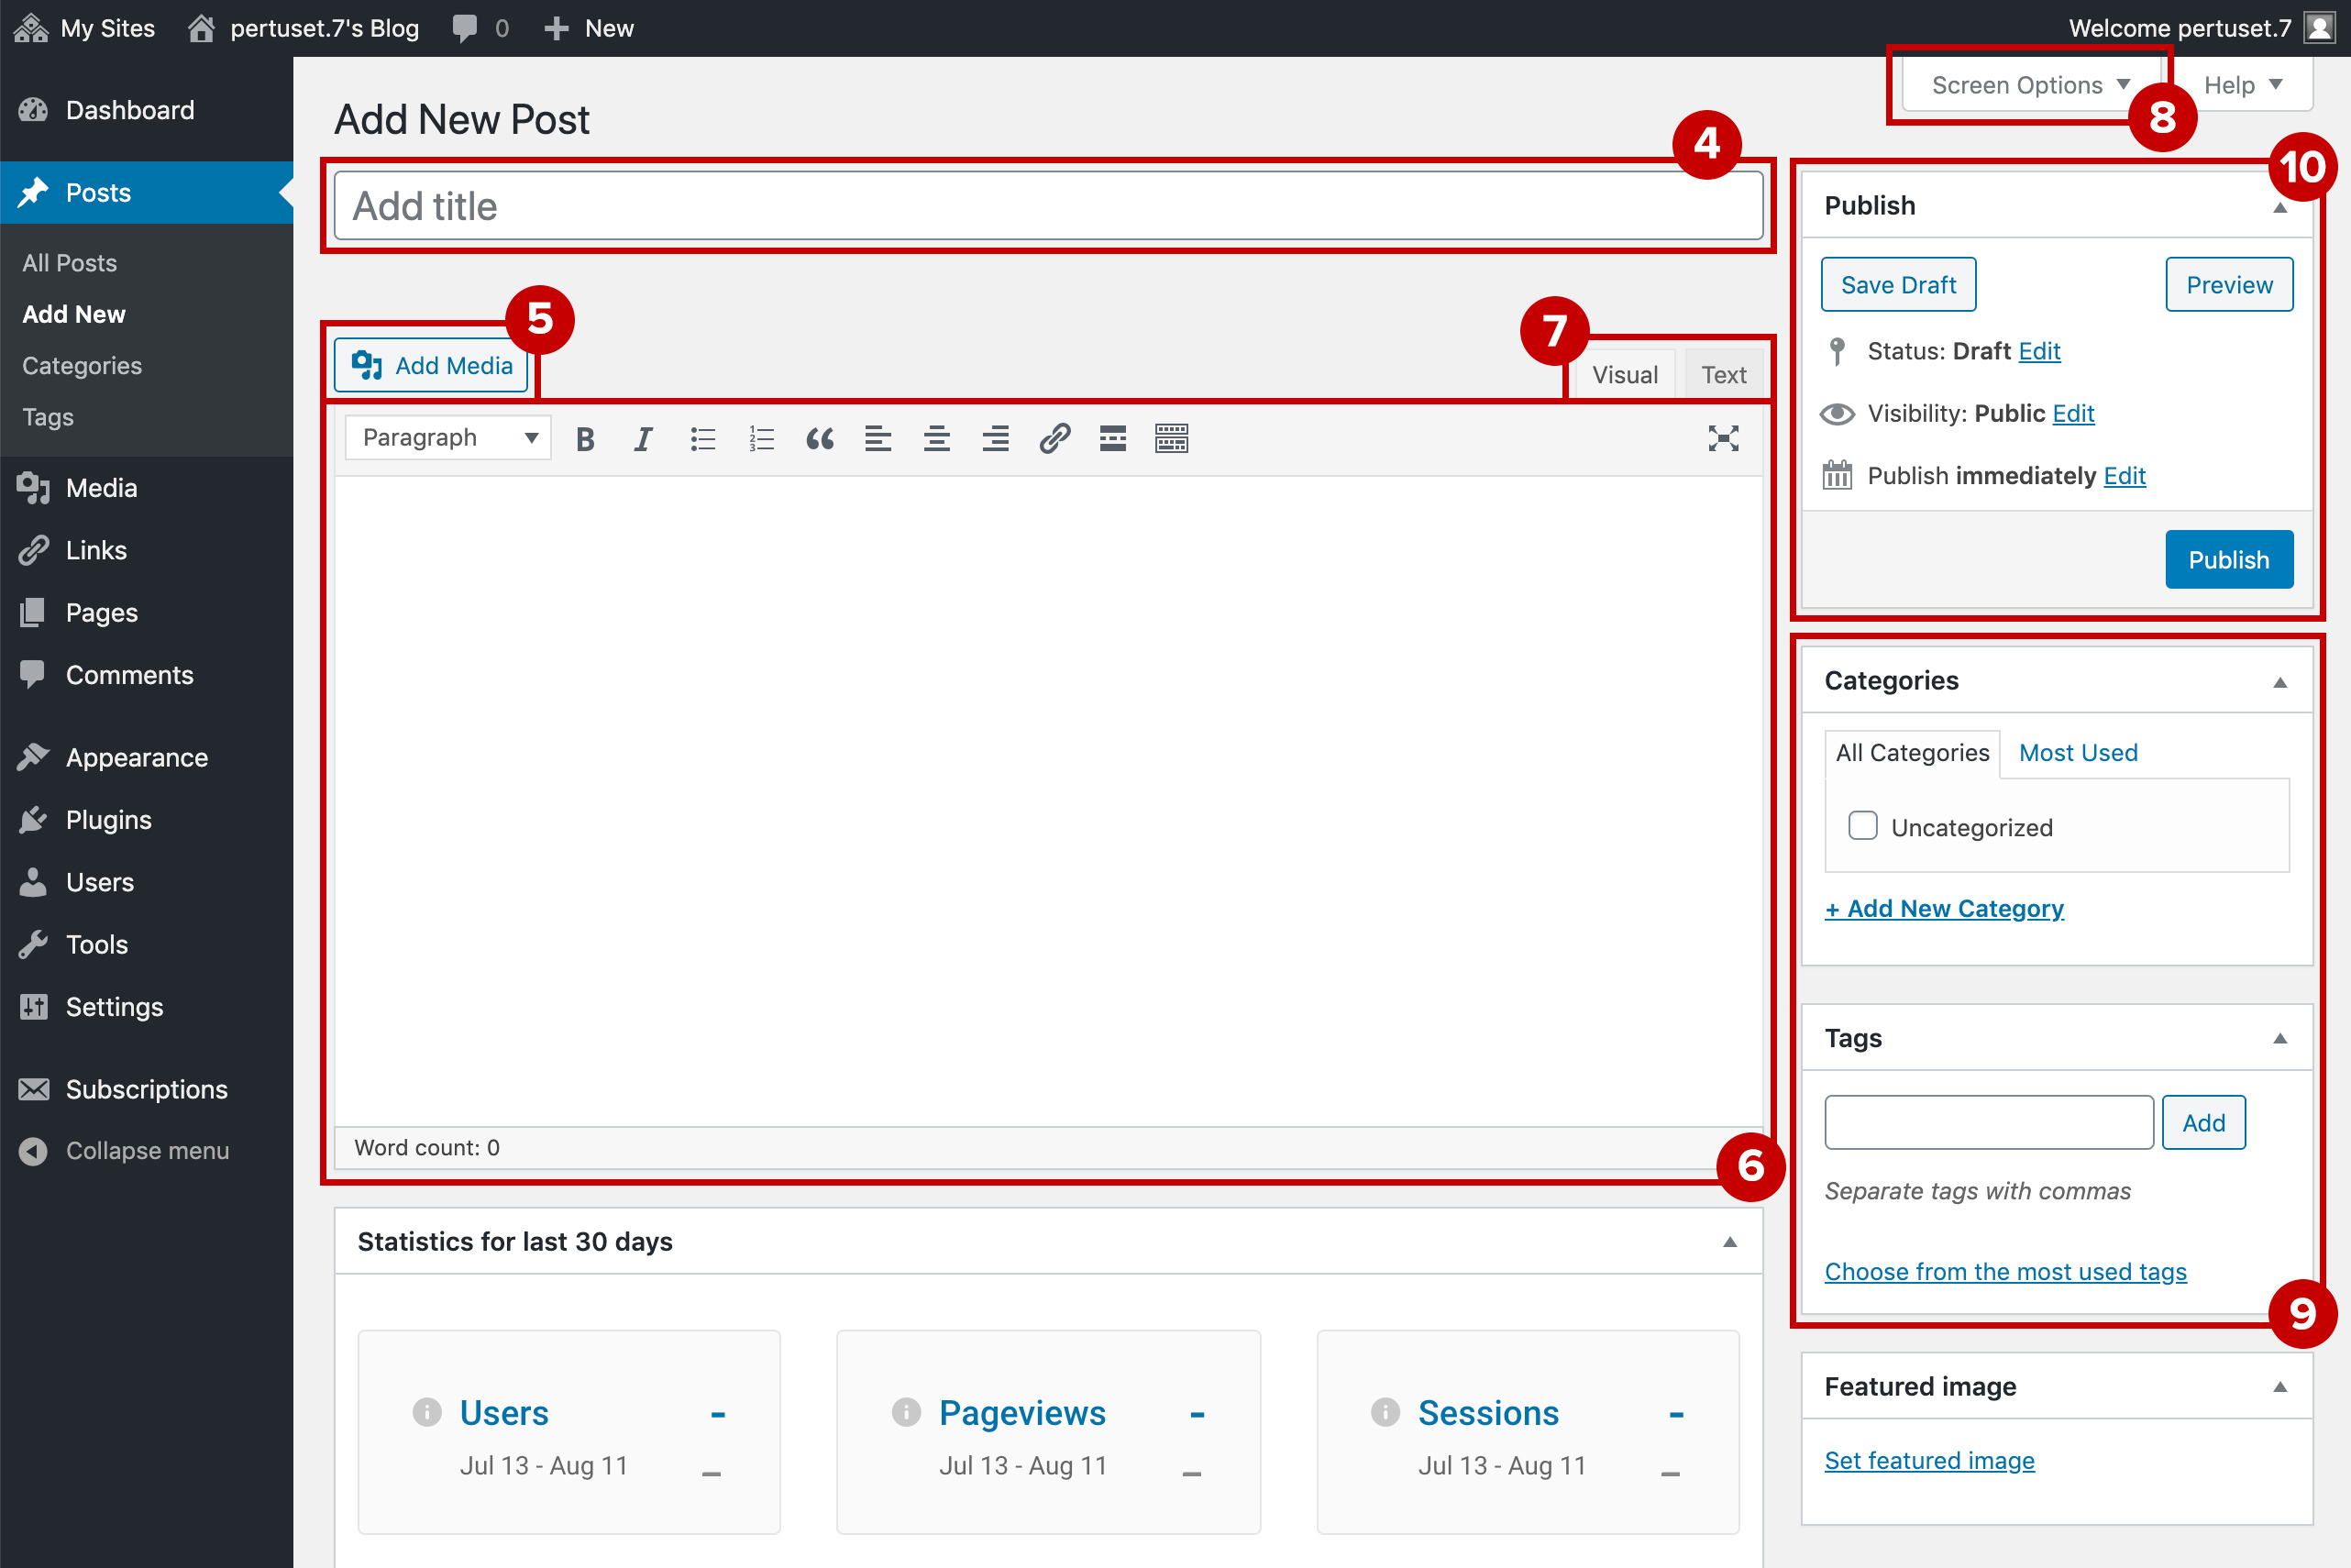 Sections of the Add New Post page highlighted in this screenshot are described in the steps below.